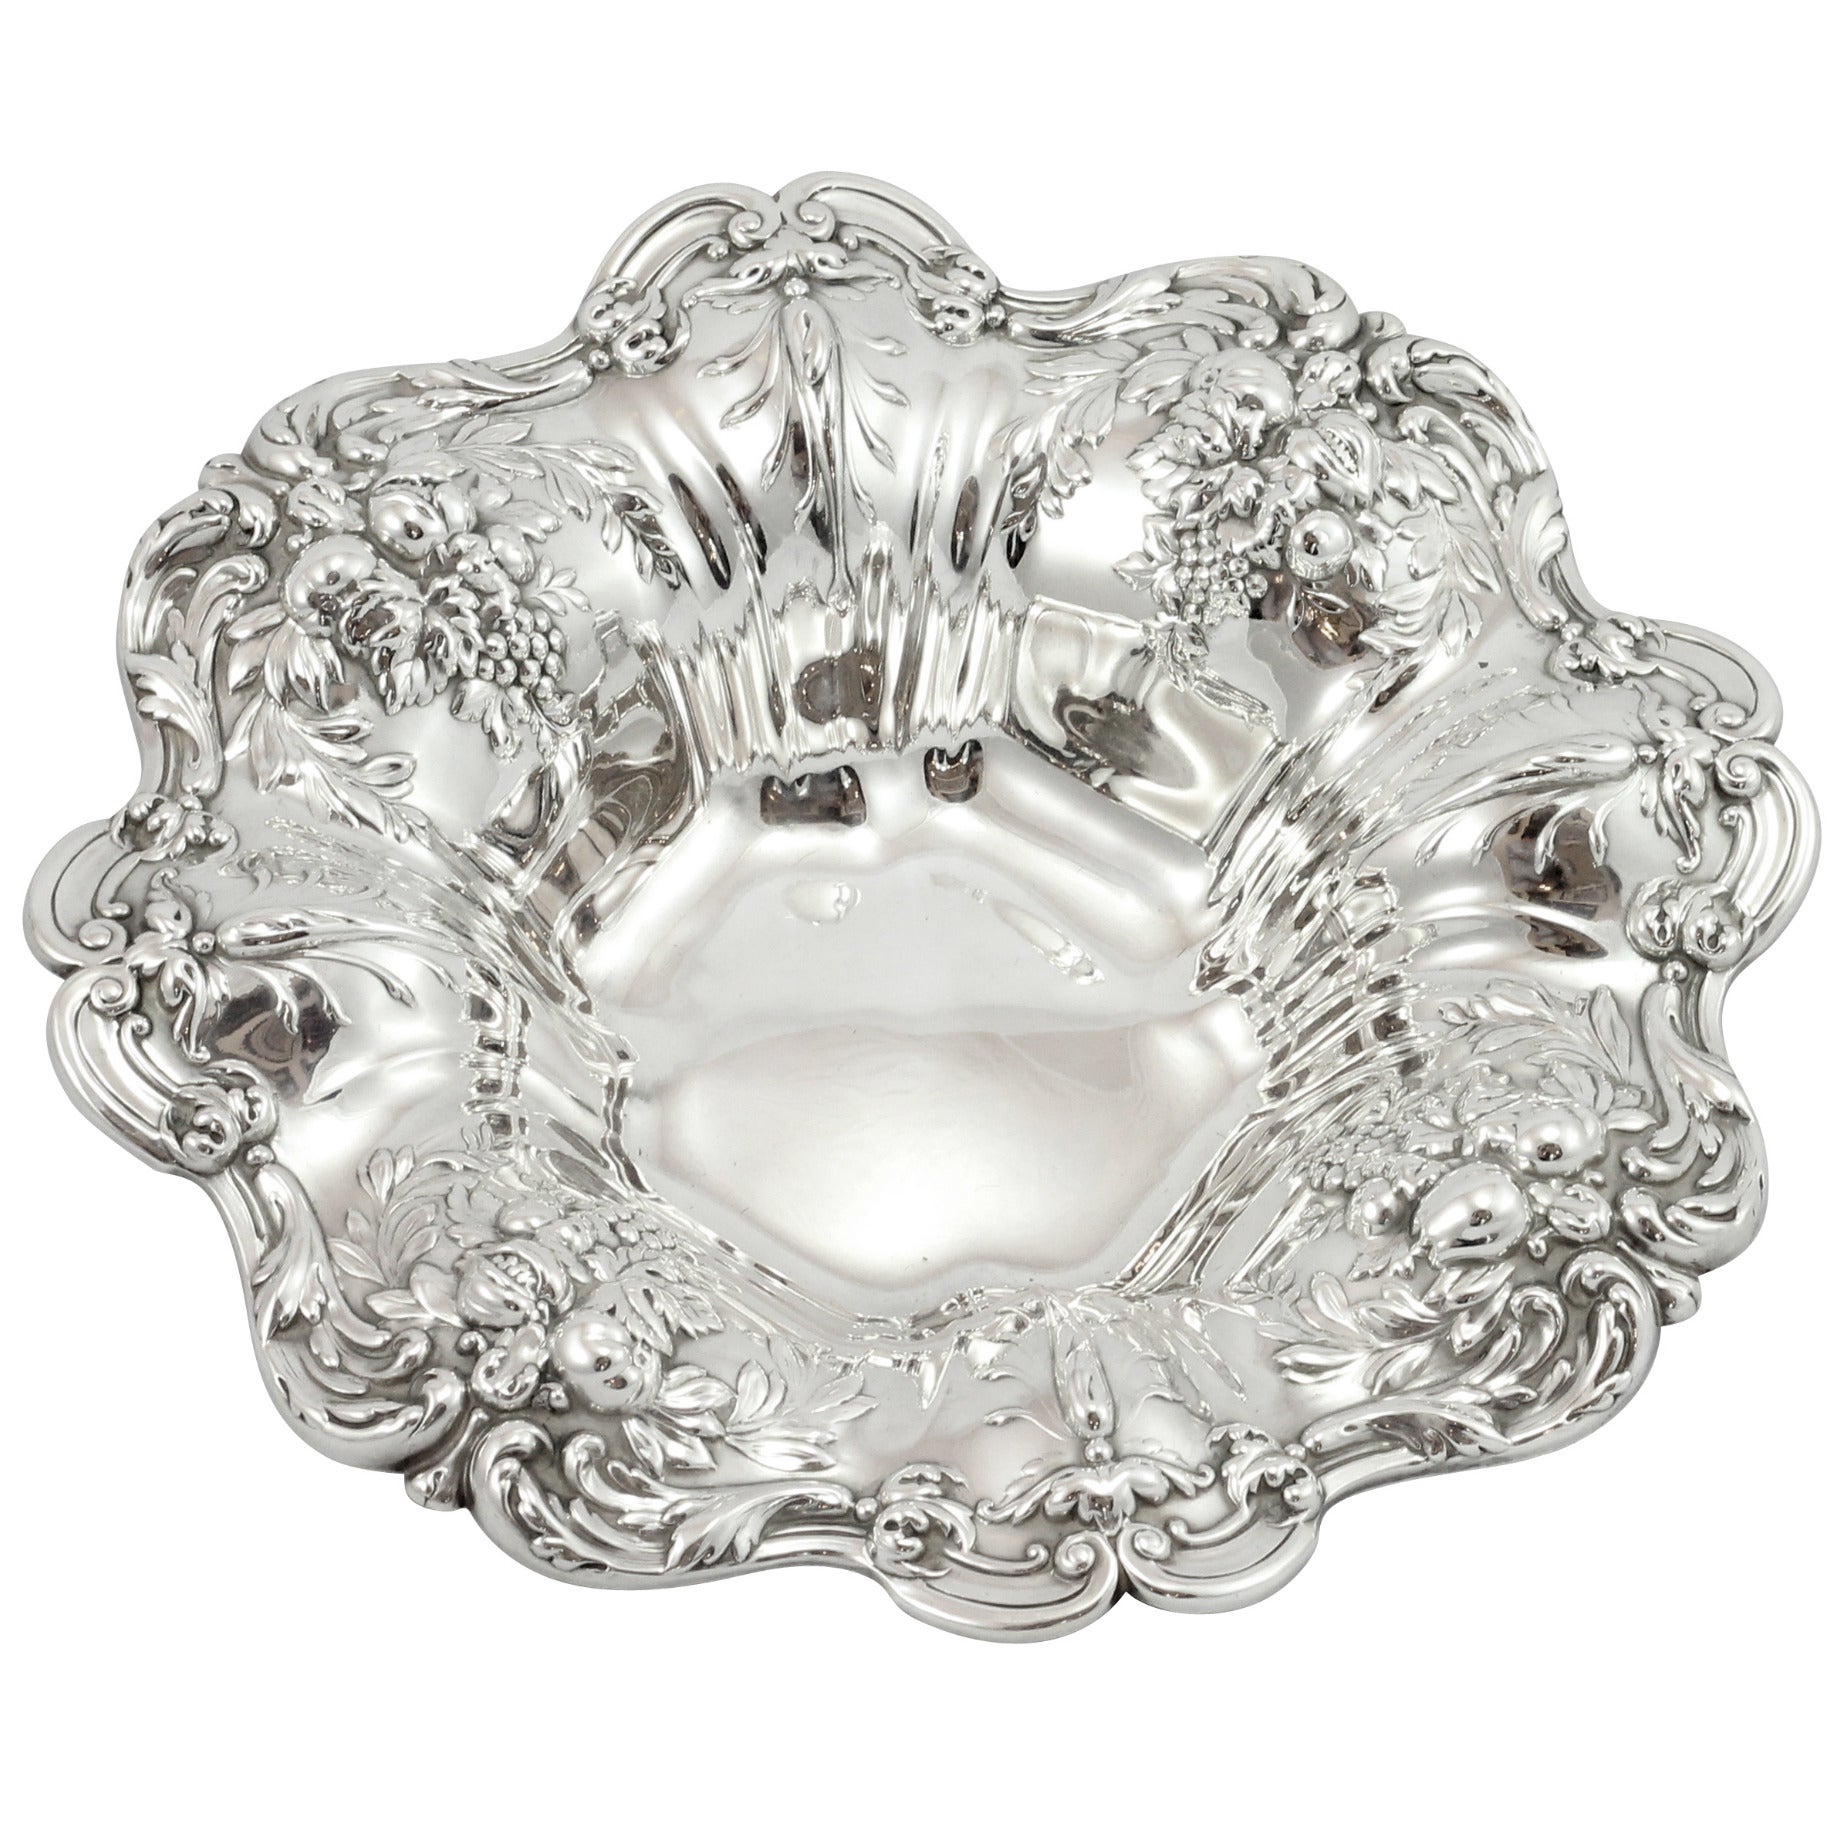 Mid-20th Century 'Francis I' Repoussé Sterling Silver Fruit Bowl For Sale